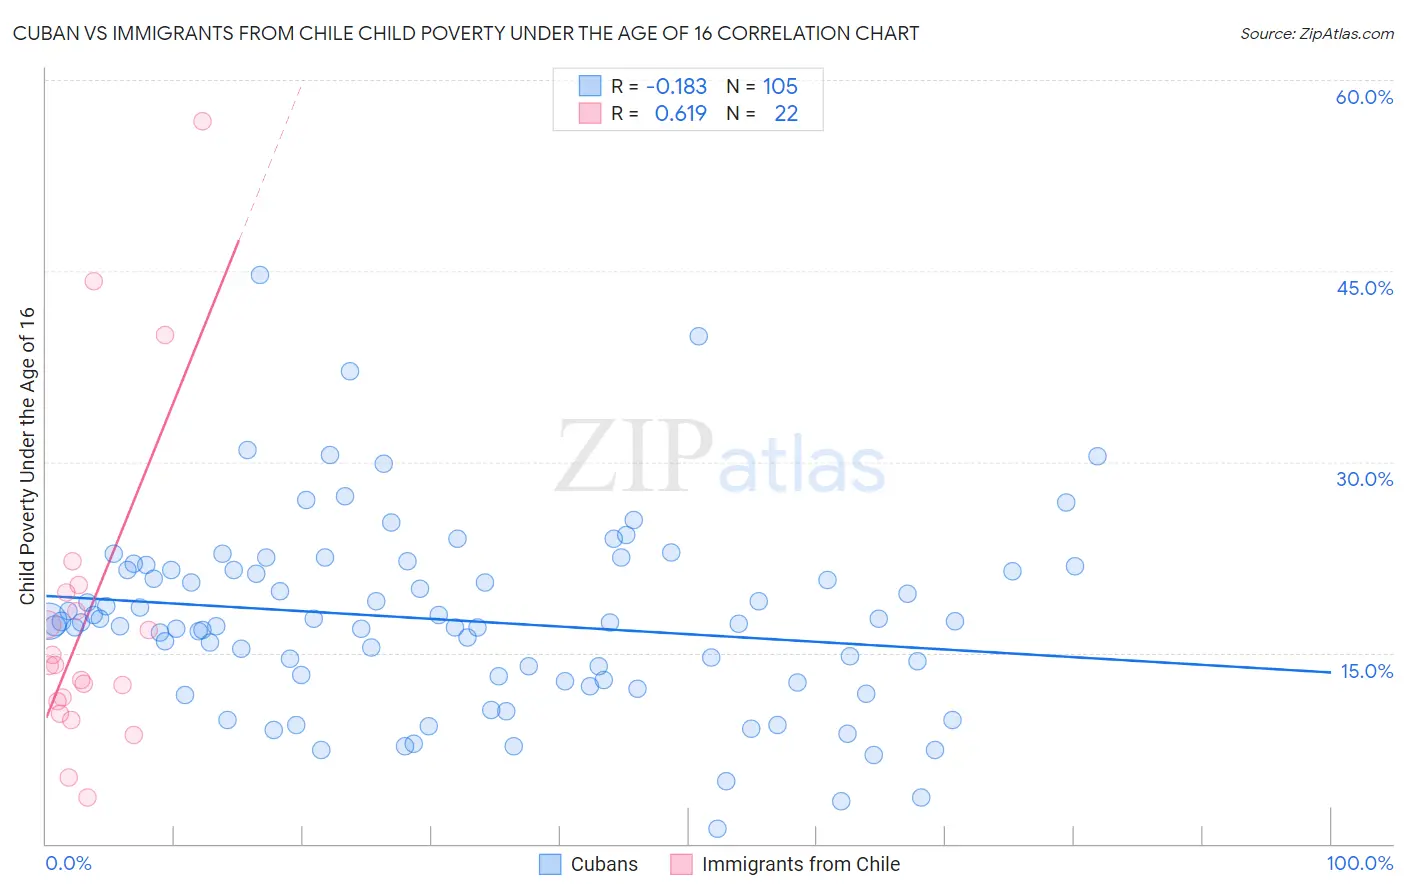 Cuban vs Immigrants from Chile Child Poverty Under the Age of 16